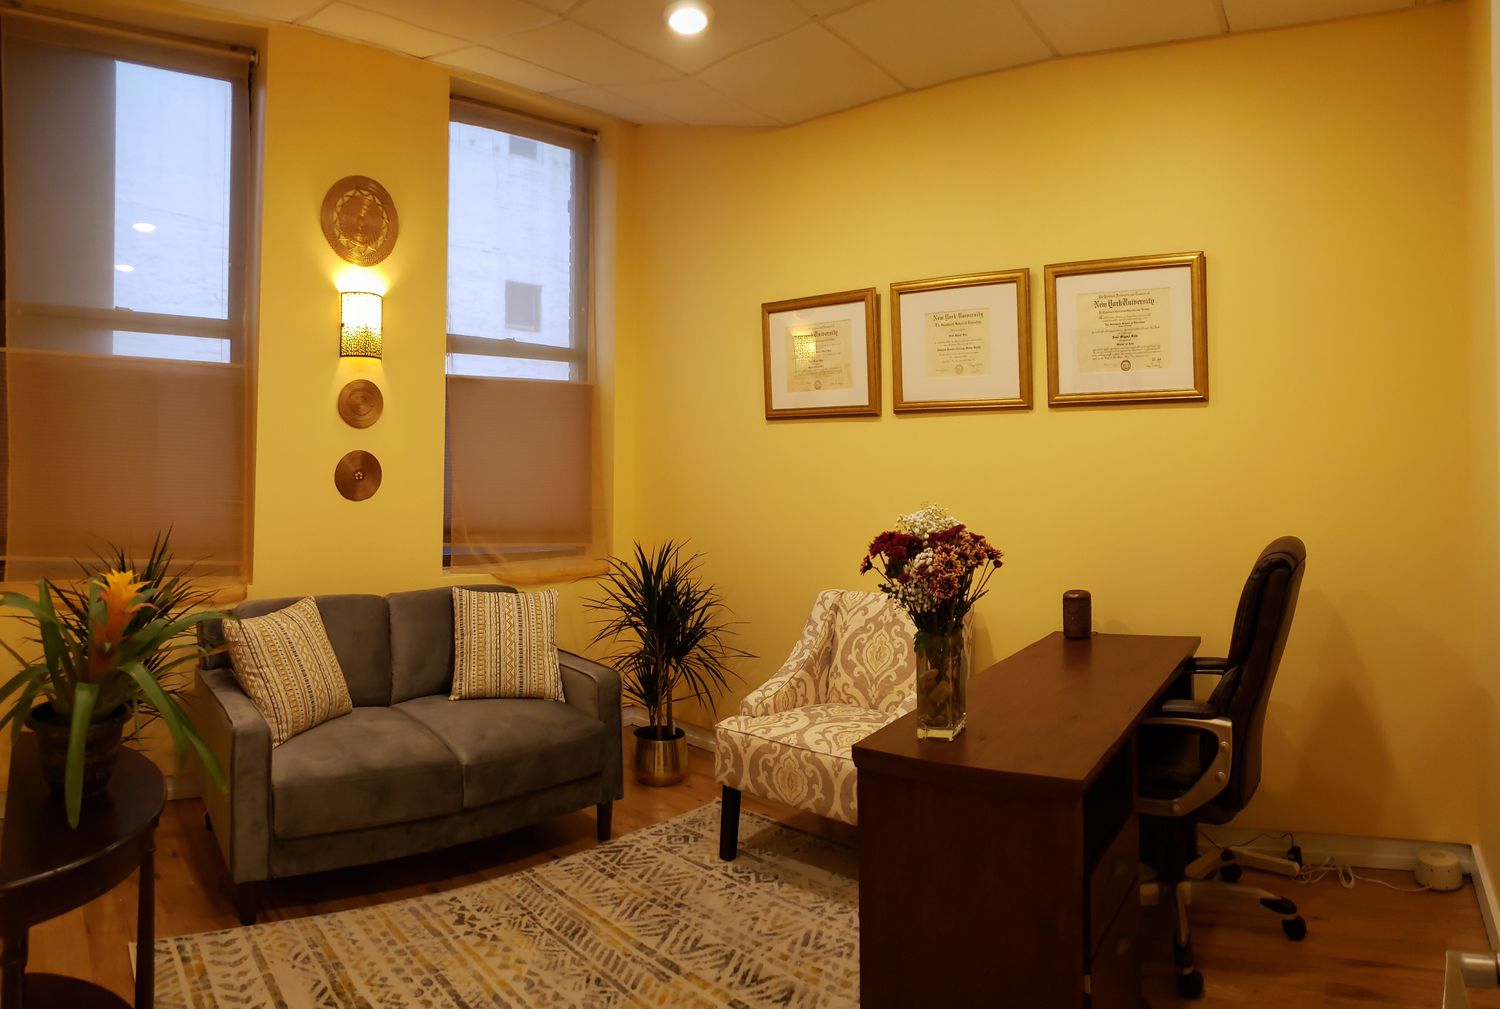 Gallery Photo of Office at  177 Prince street NY NY 10012 SUITE 205